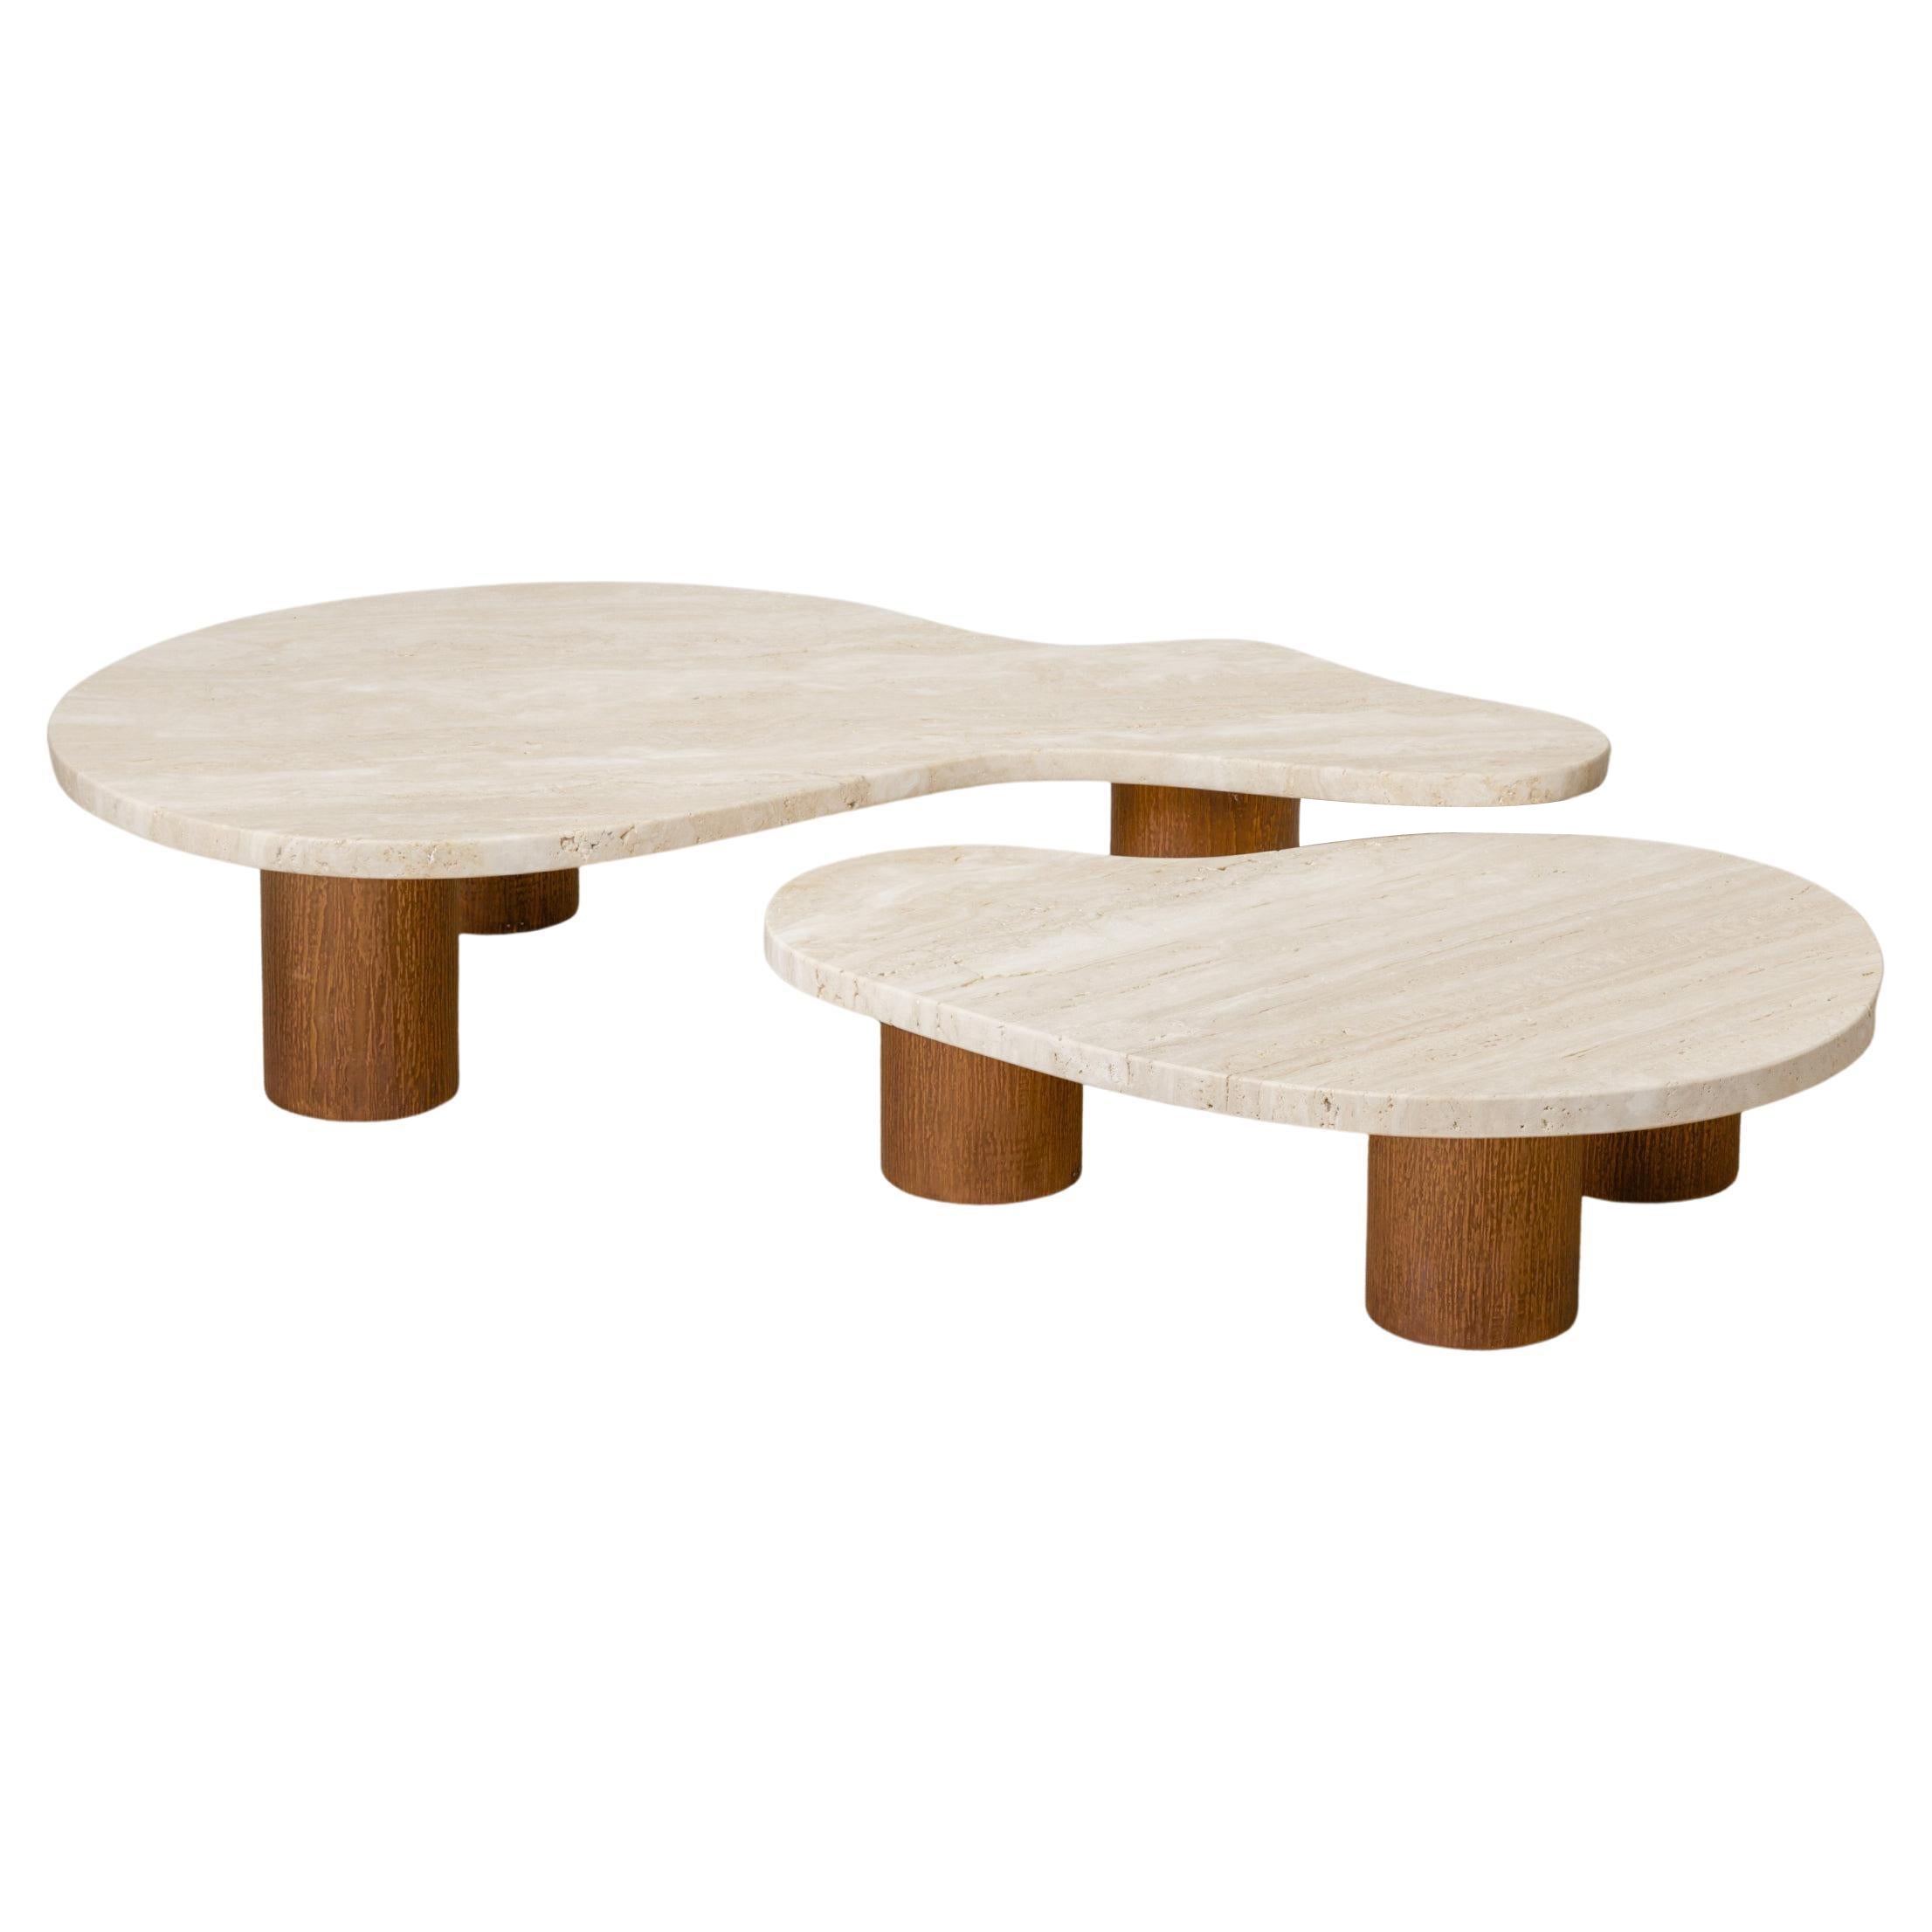 Deposit 50% / Set of 2 Andrea and Luca Coffee Table by Umberto Bellardi Ricci For Sale